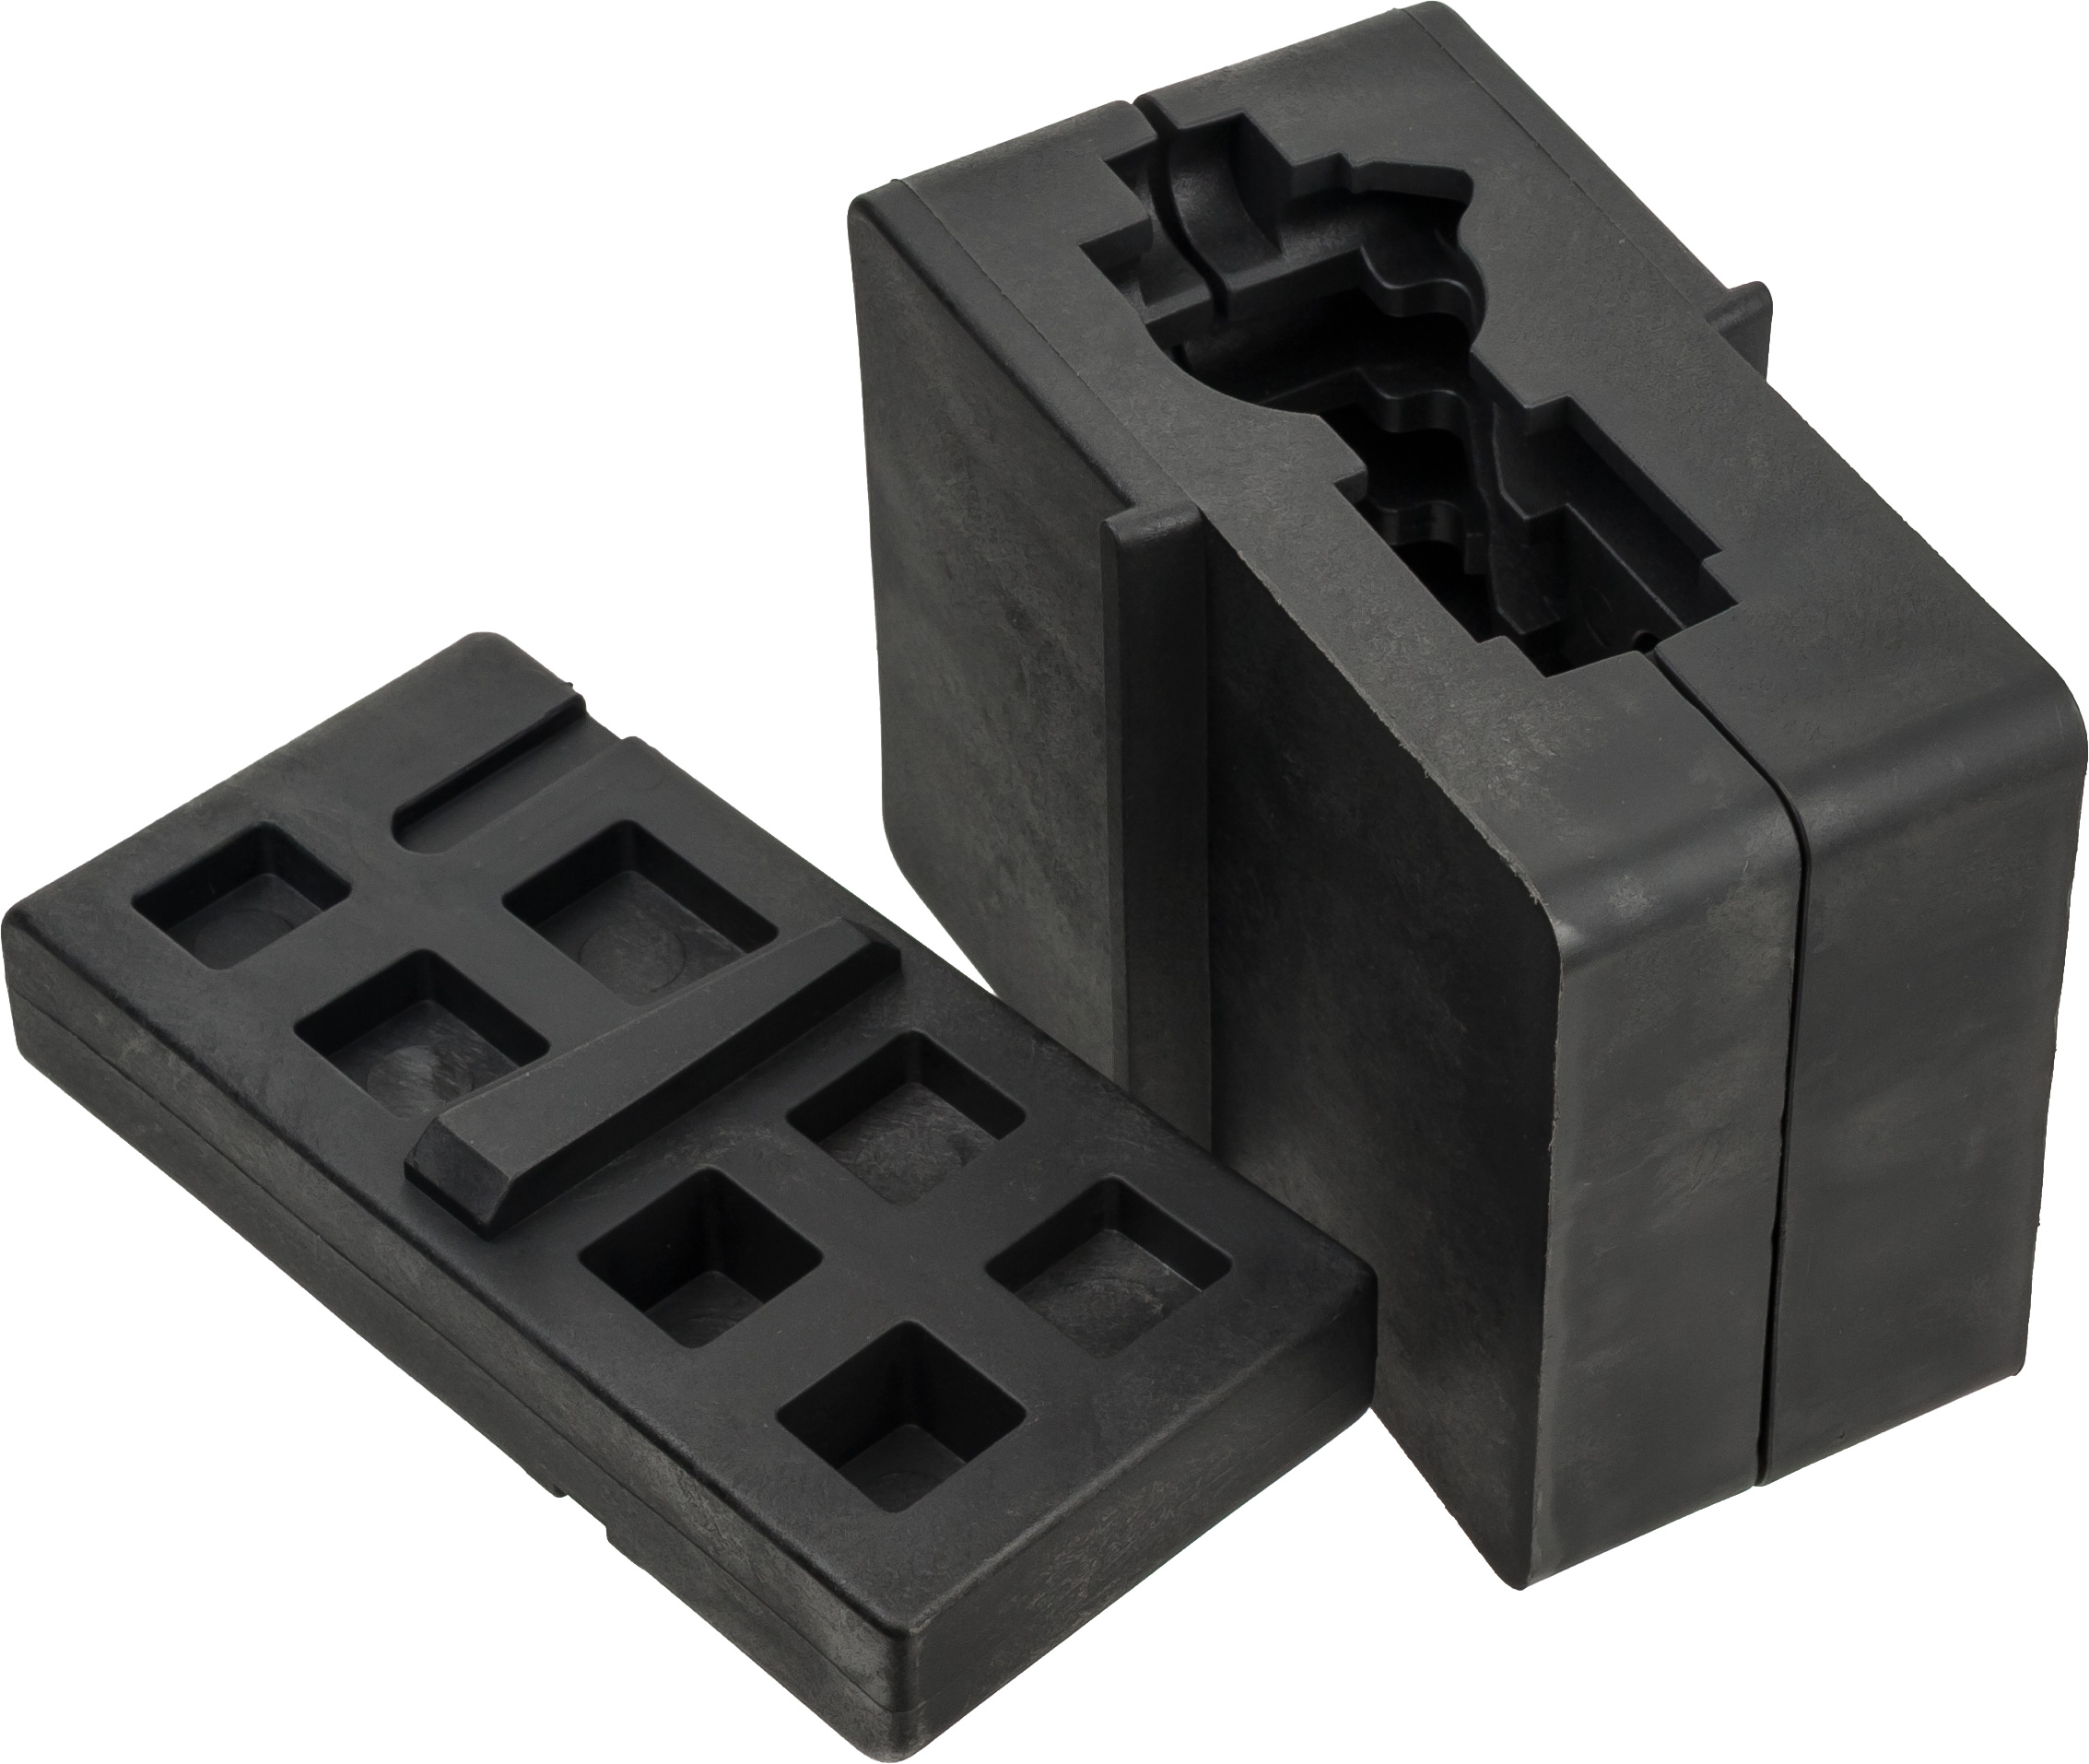 Ar15 Vise Block Upper & Lower comboSpecifications for JE Machine Tech A...